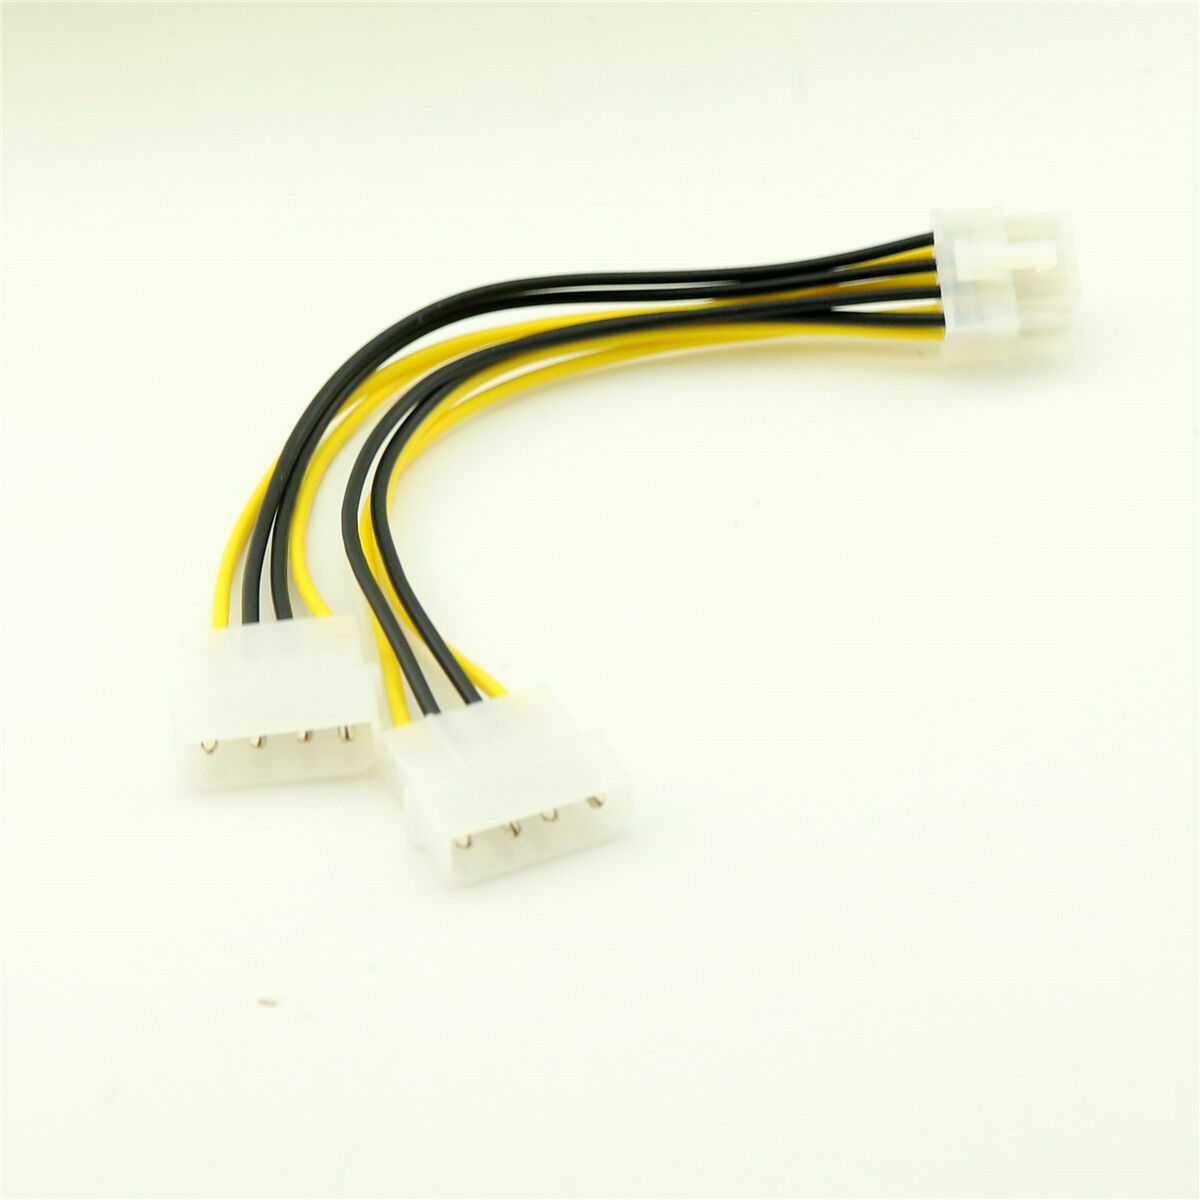 ATX 8 shop Pin EPS12V to Dual 4 Power Max 90% OFF Male Molex Supp Motherboard